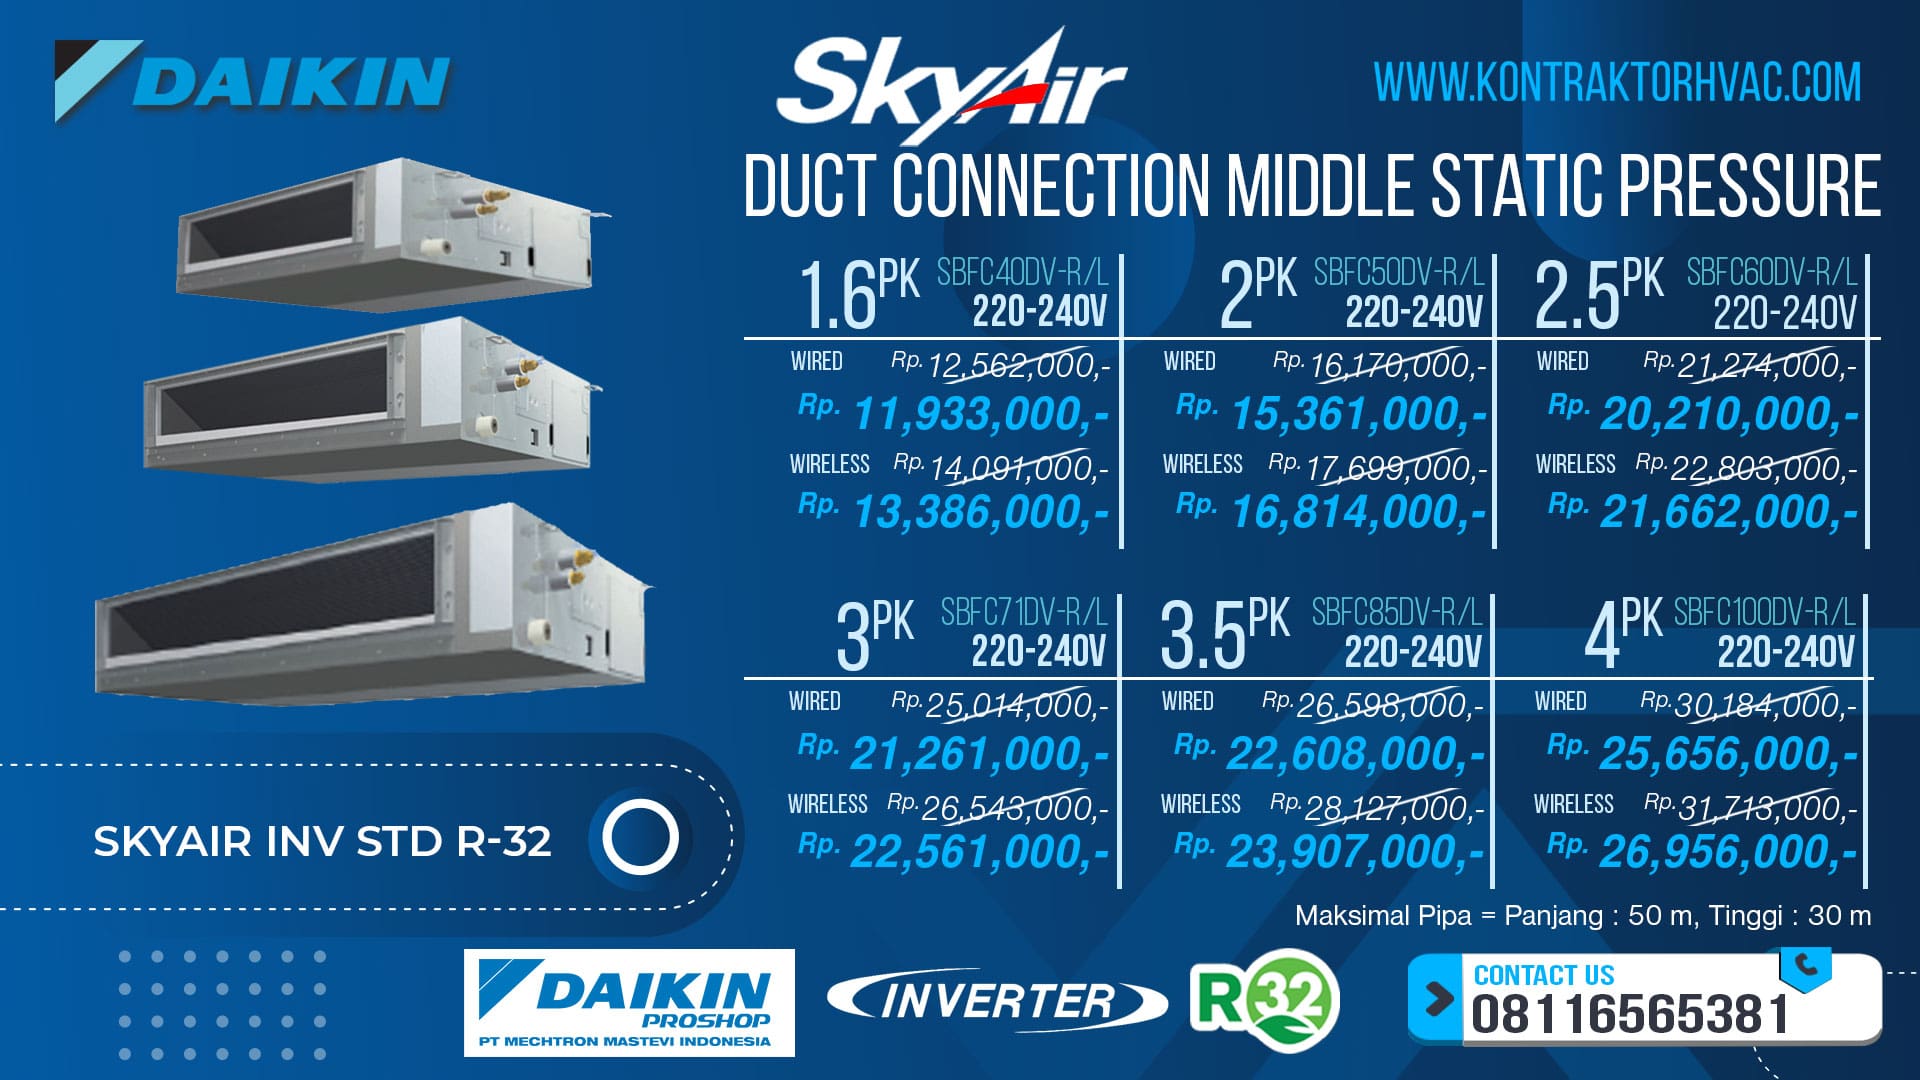 4.Skyair-Inv-STD-R-32-Duct-Connection-Middle-Static-Pressure-v-min